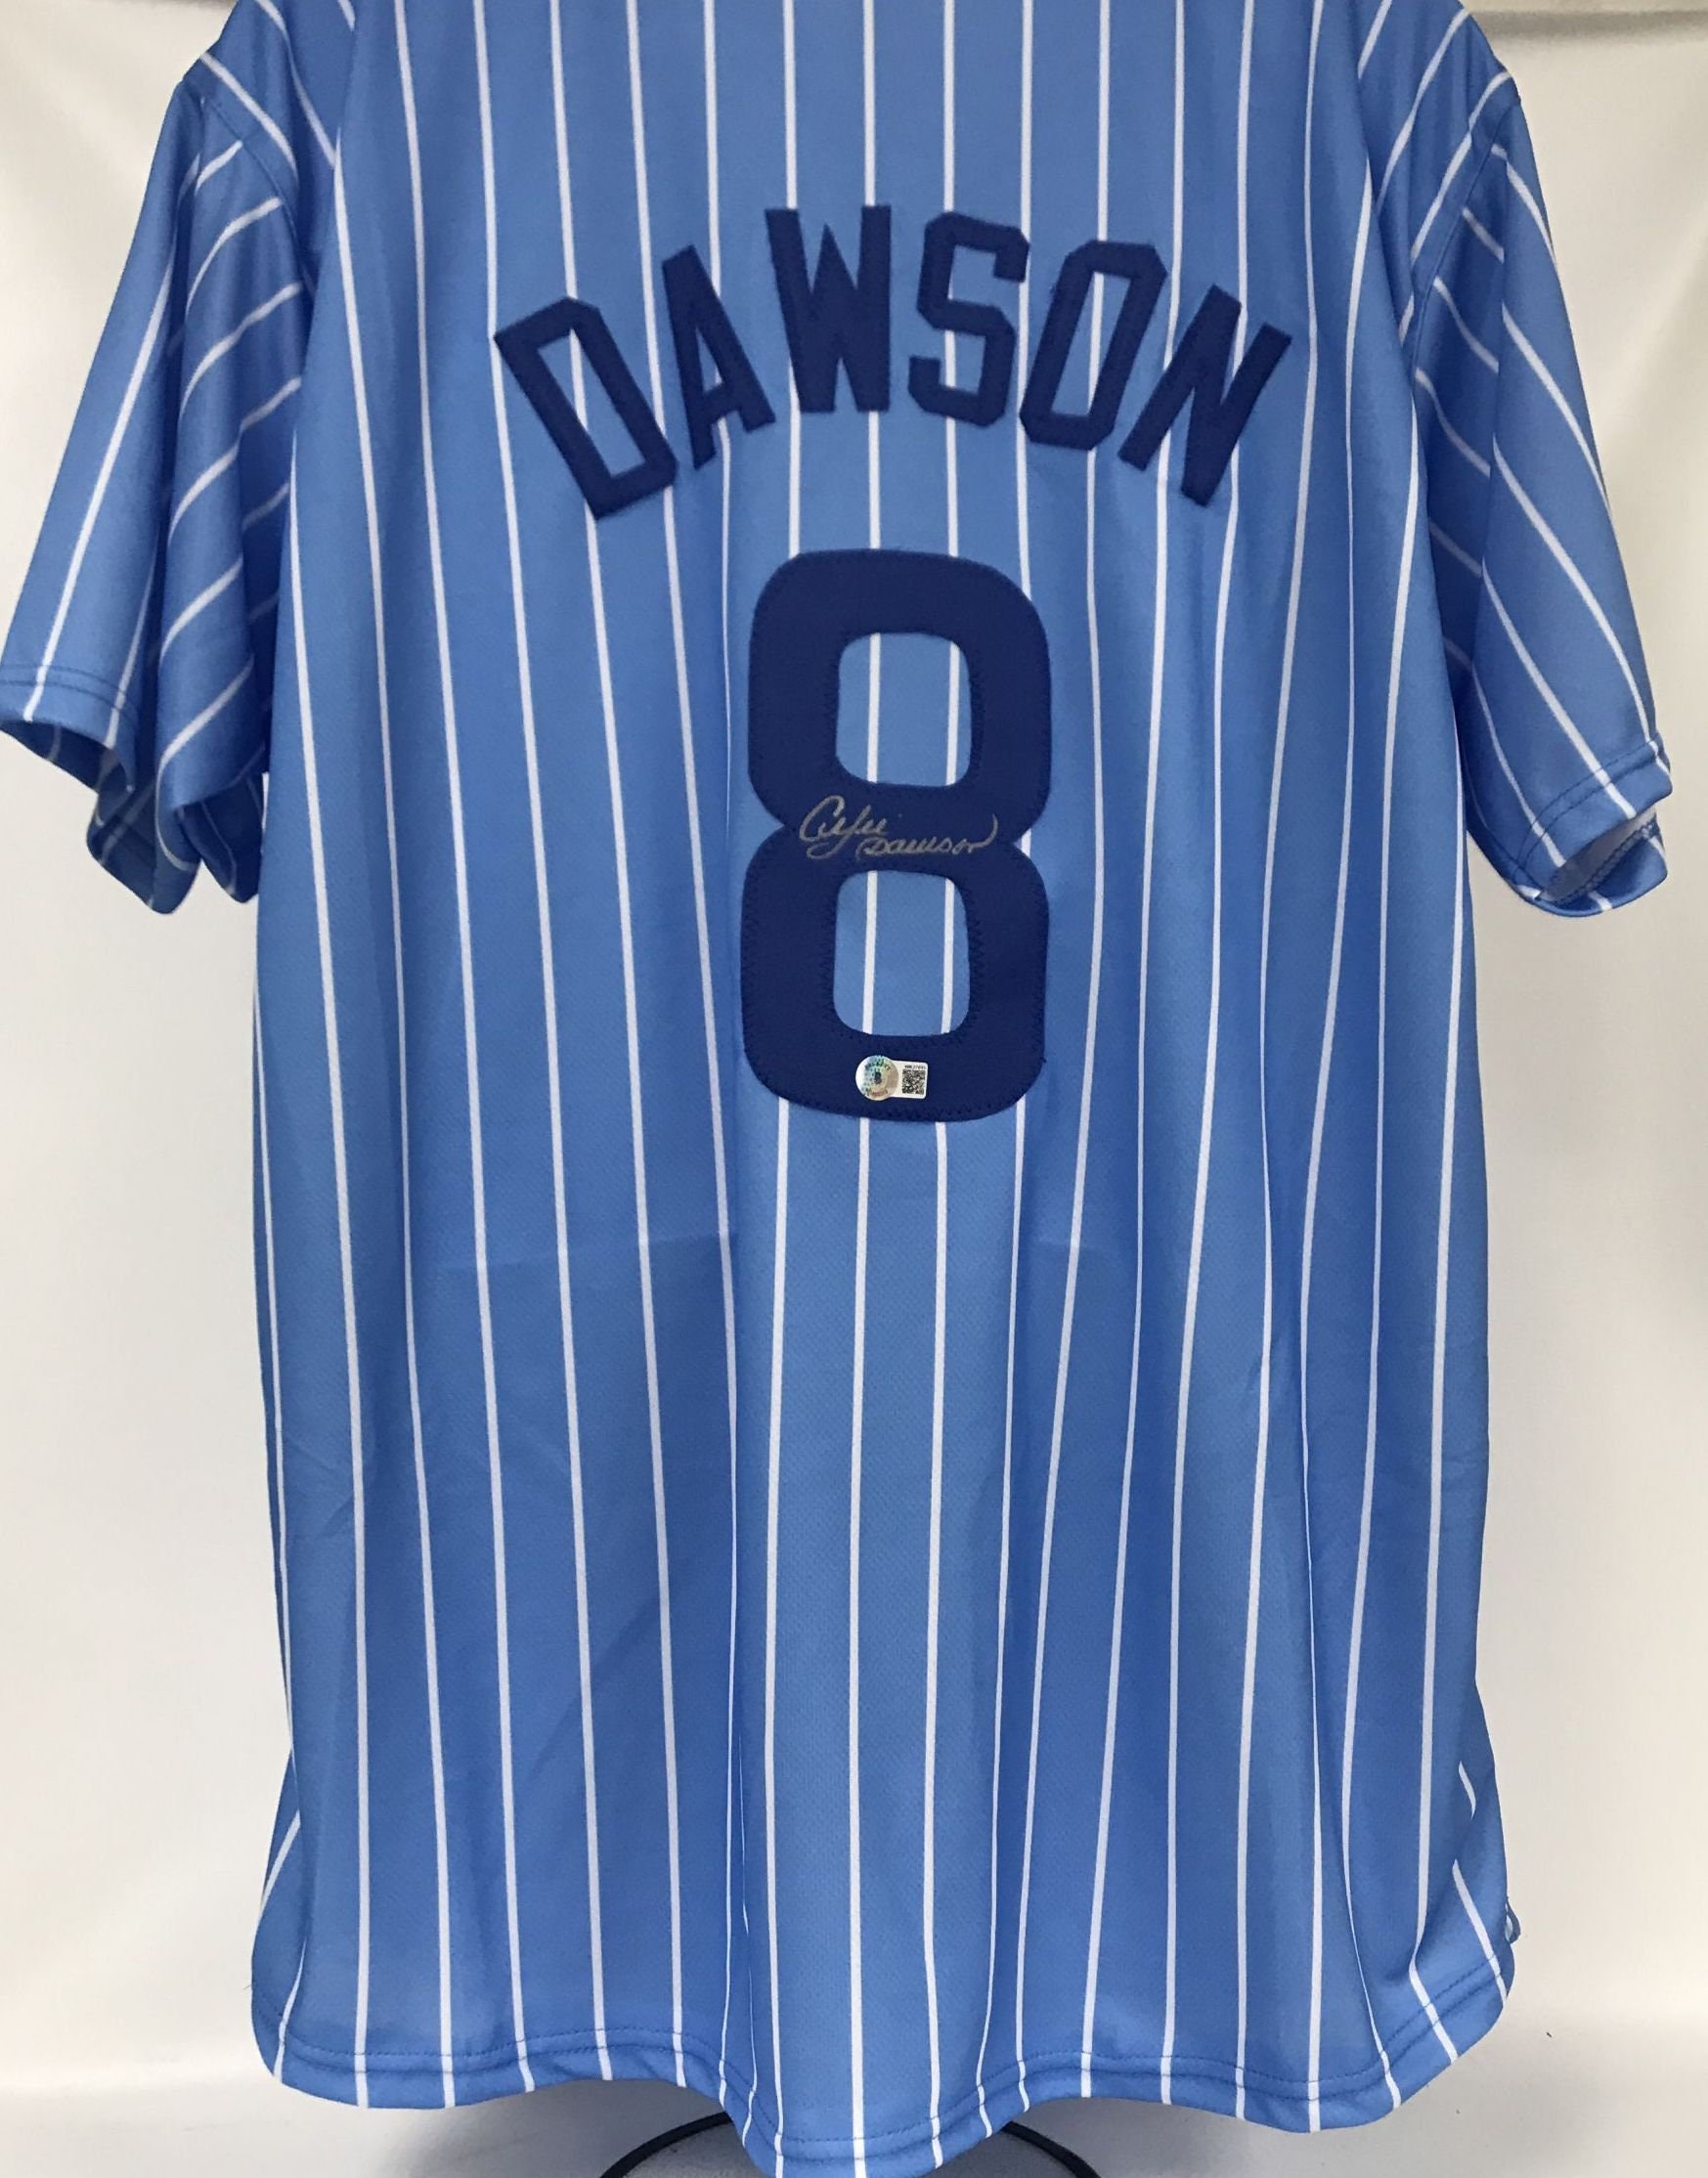 Buy Andre Dawson Signed Autographed Chicago Blue Pinstripe Online